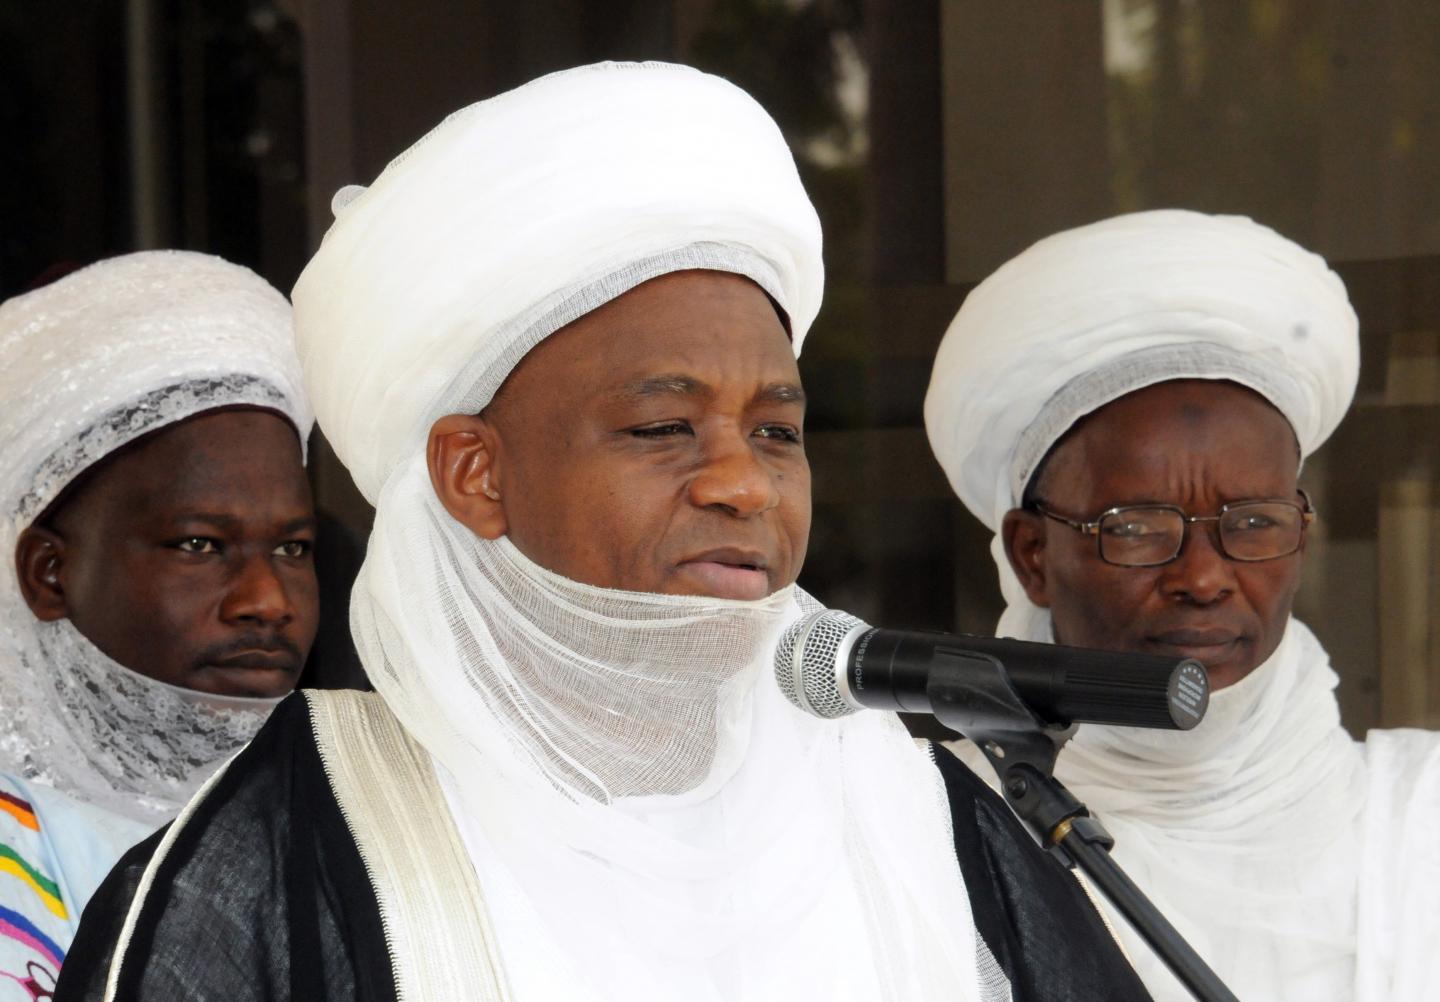 The Sultan of Sokoto Muhammad Sa'ad Abubakar III (C), pictured addressing the media in Abuja on December 27, 2011, has warned the military to deal with Zakzaky's situation sensitively or risk radicalizing his followers.